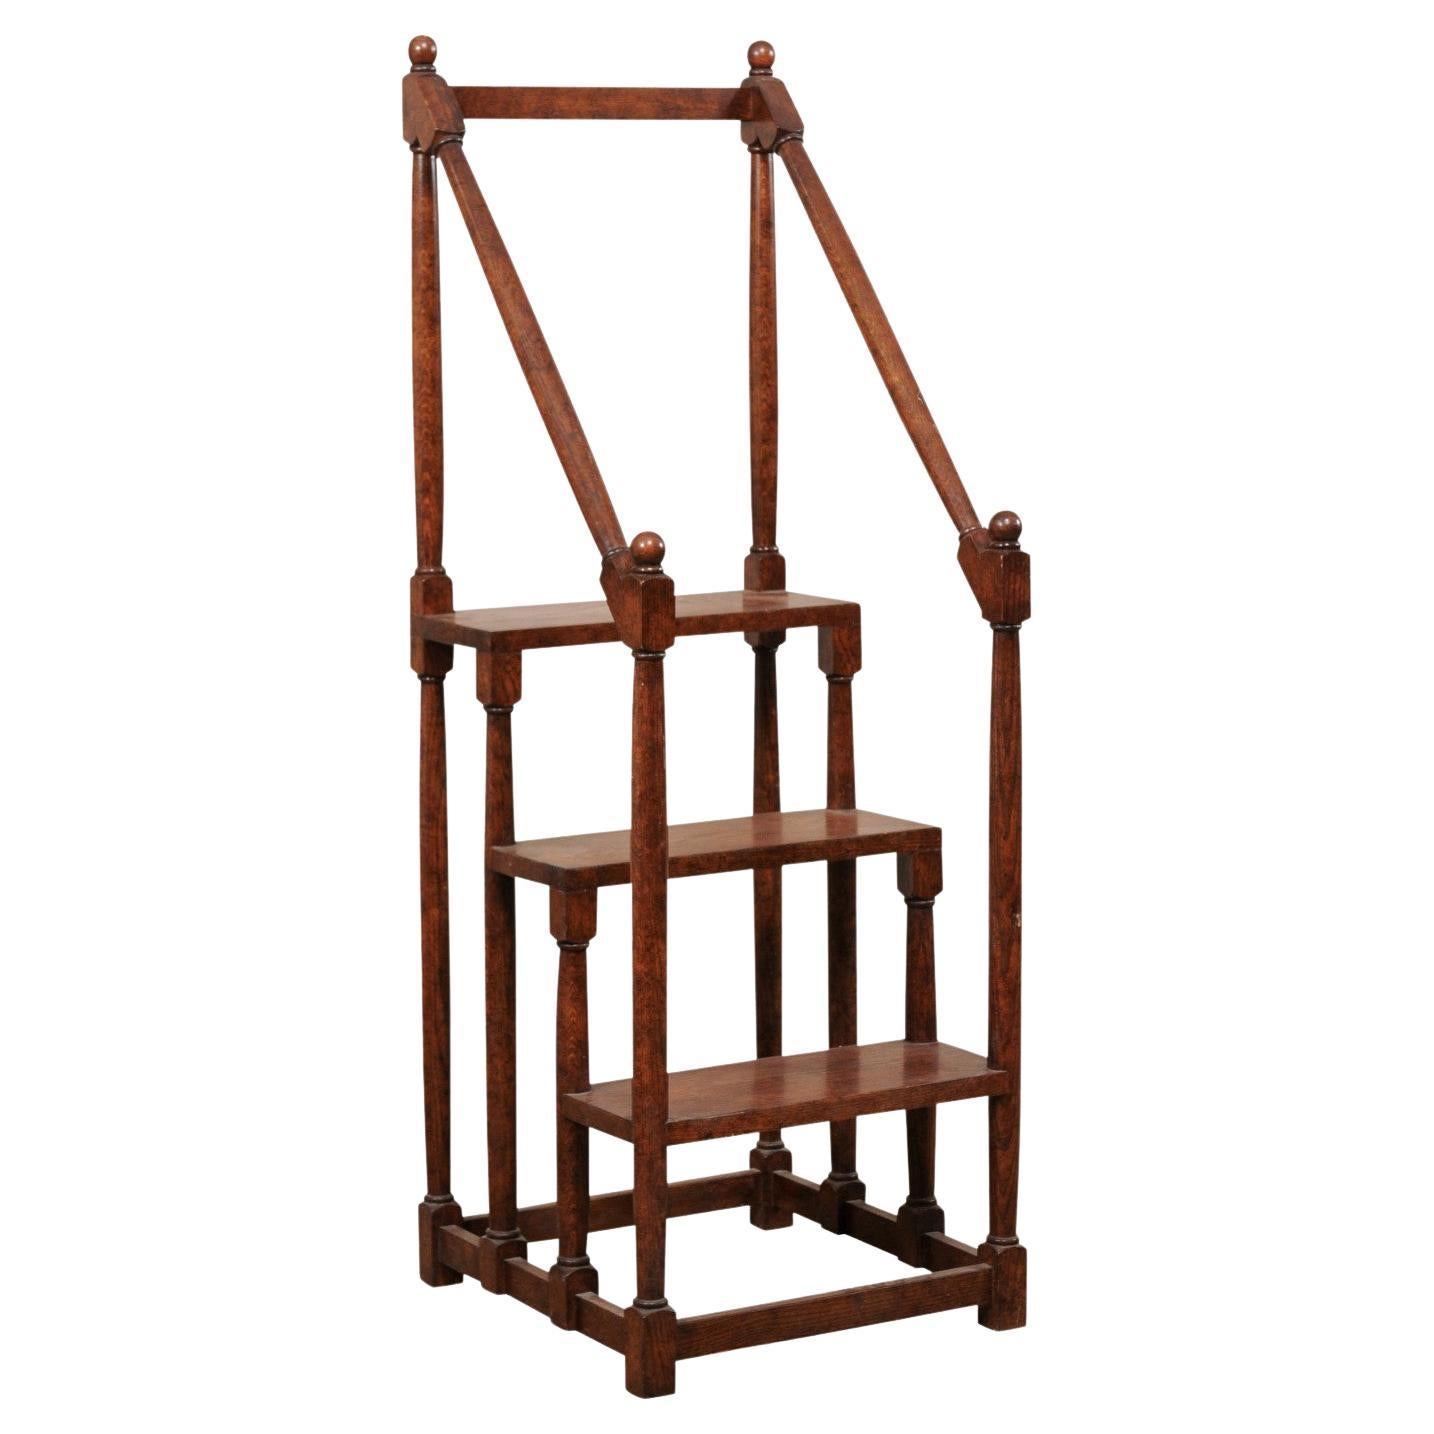 English Carved-Wood Library Step Ladder Would Also Be a Great Kitchen Piece